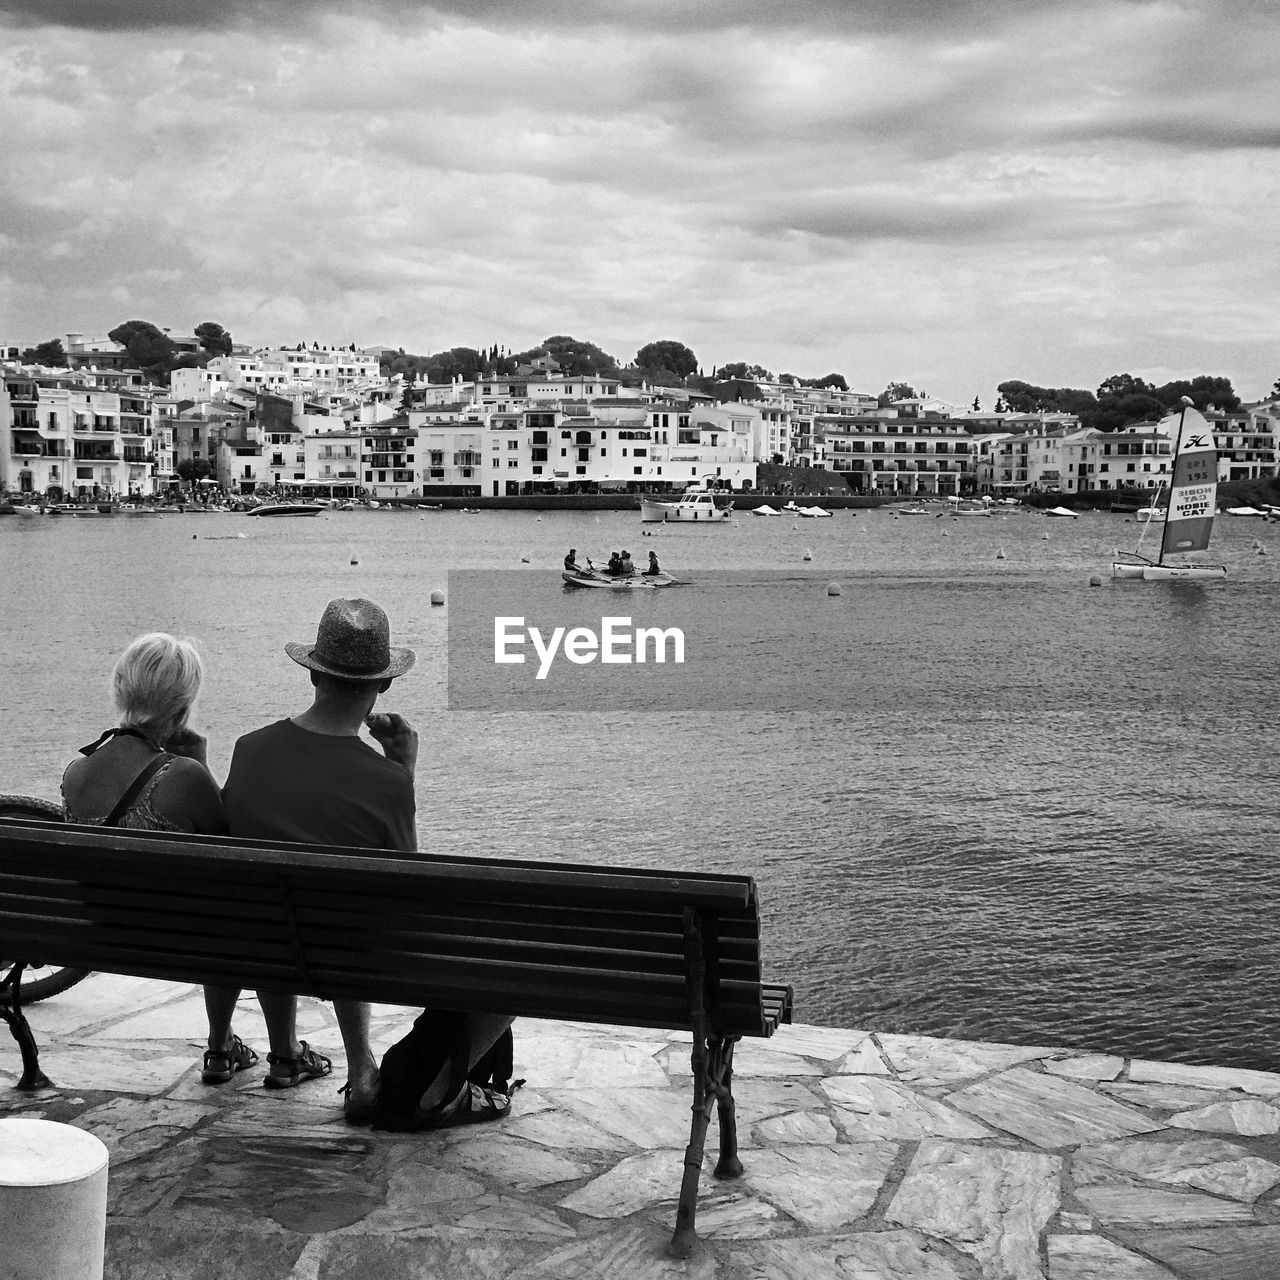 Man and woman sitting on bench looking at boats in river by city